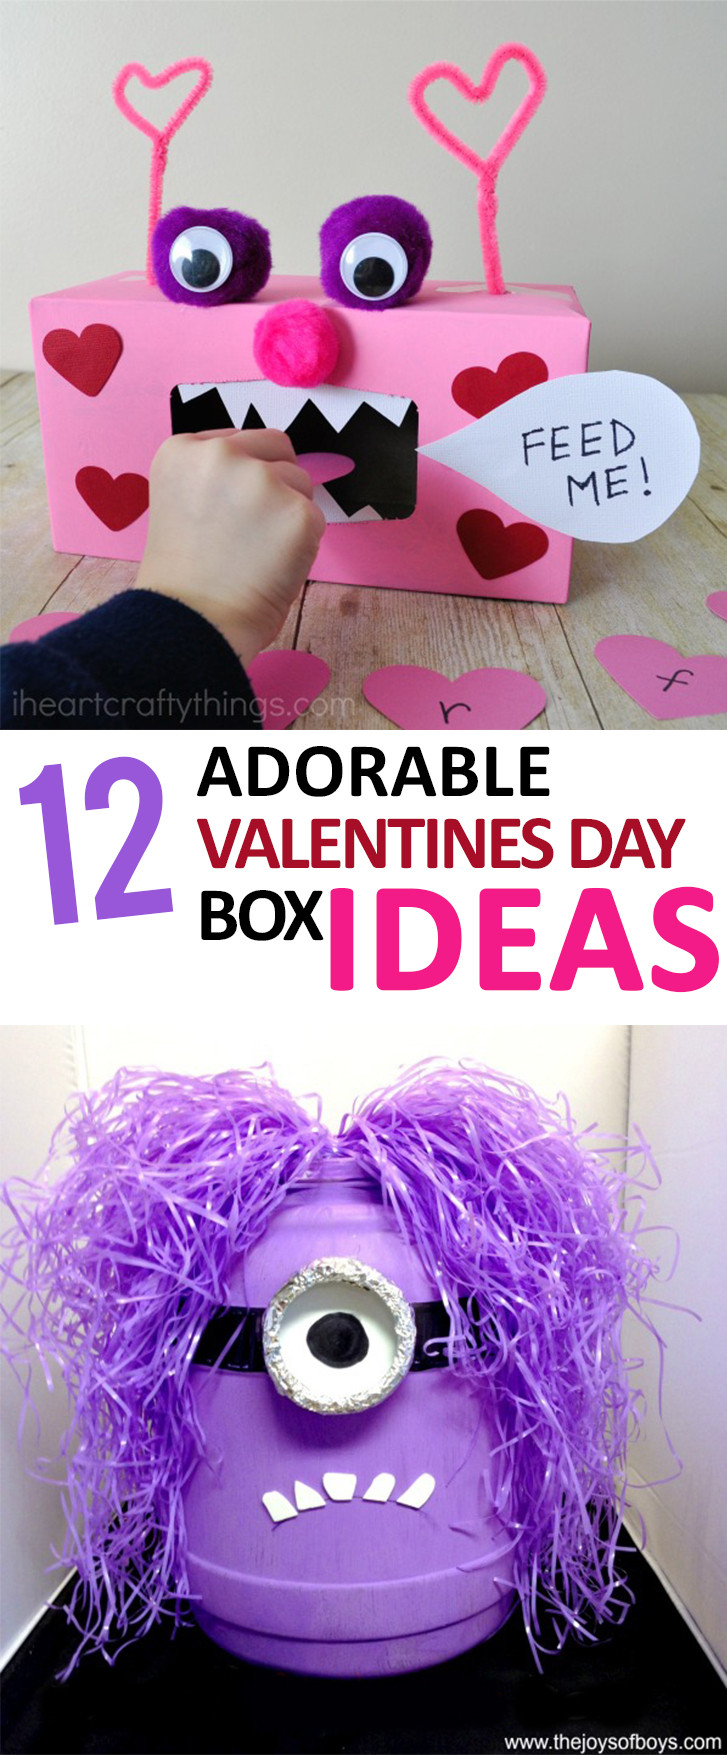 Valentines Day Card Box Ideas
 12 Adorable Valentines Day Box Ideas – Sunlit Spaces